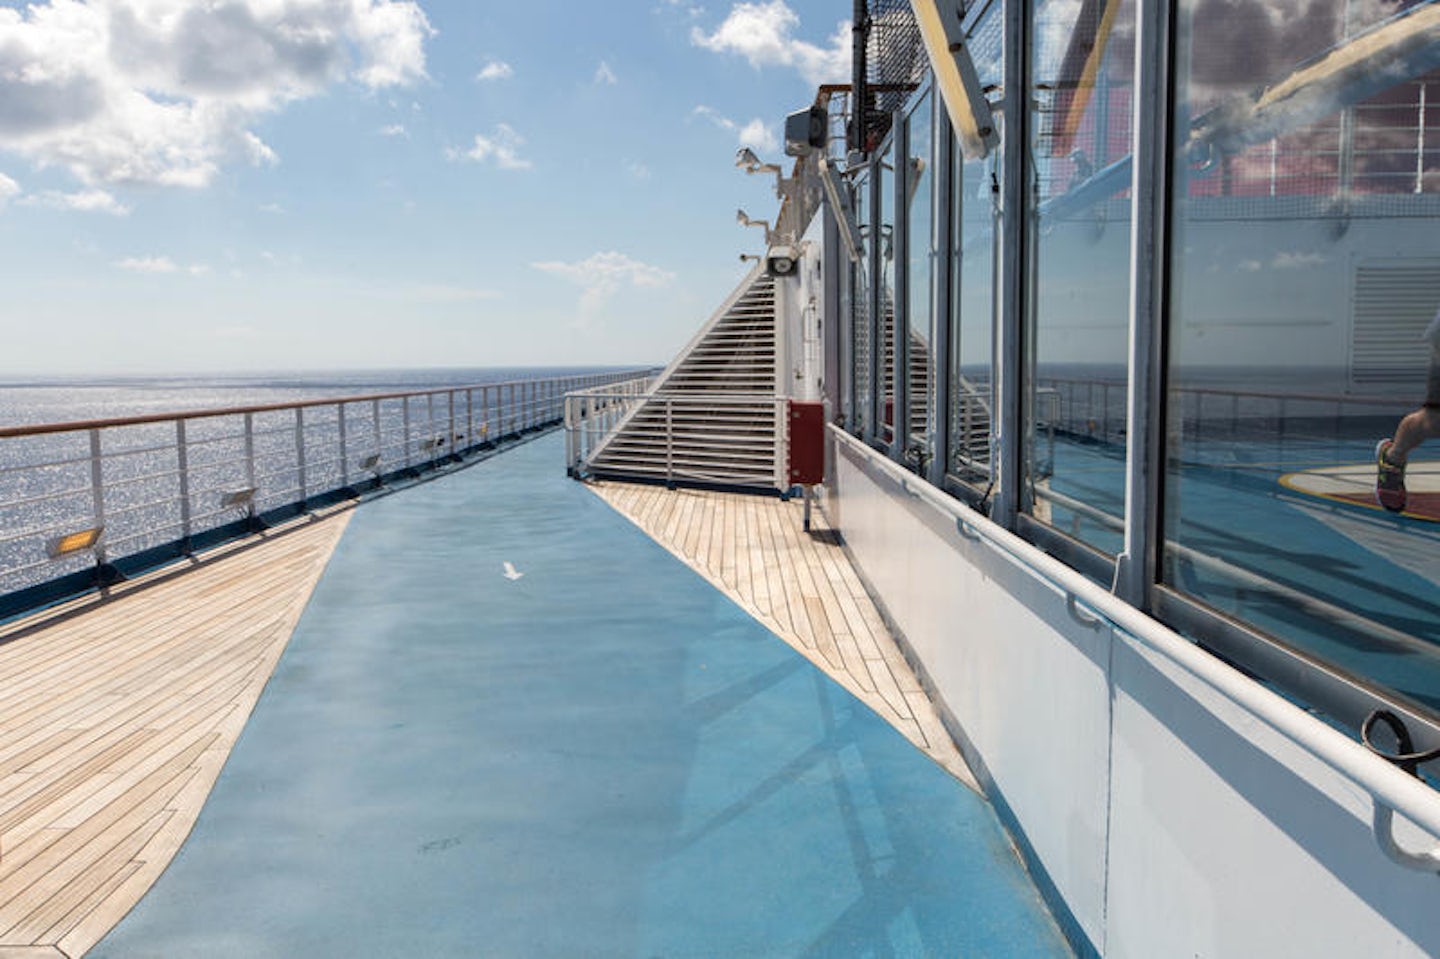 Outdoor Jogging Track on Carnival Freedom